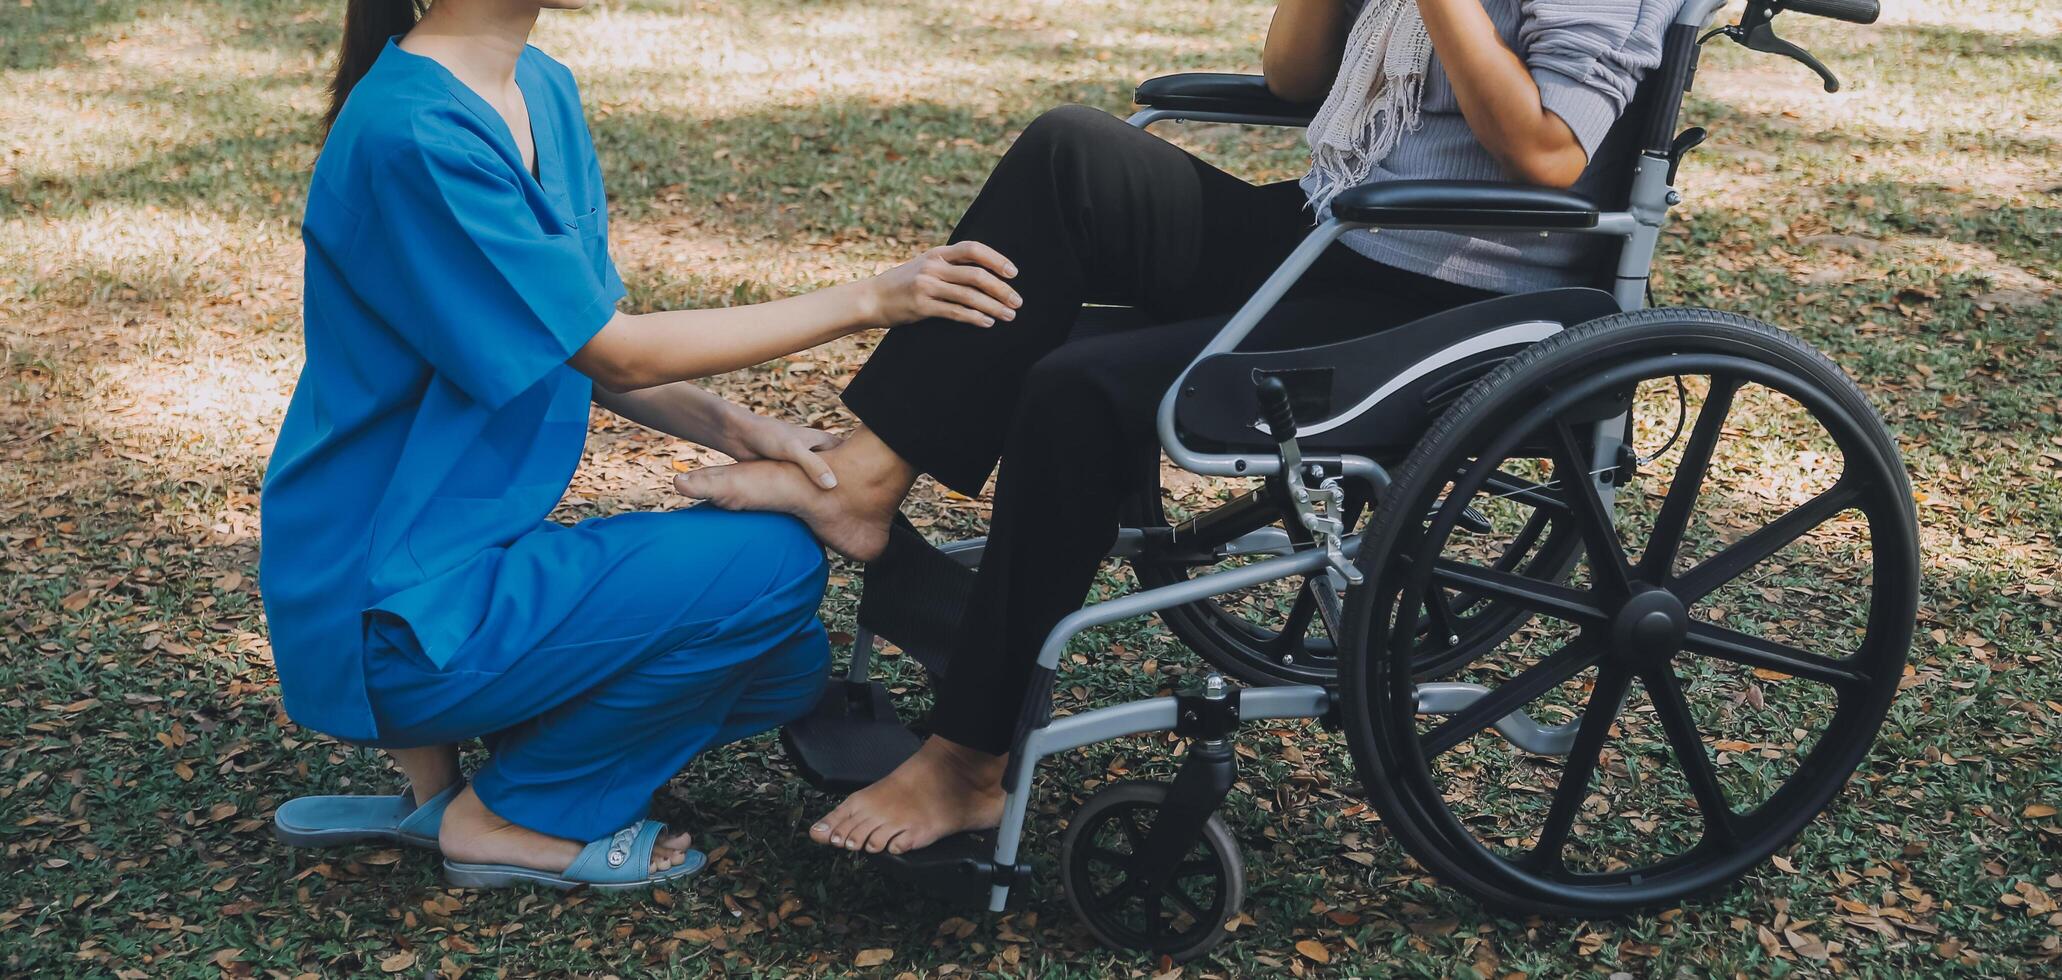 young asian physical therapist working with senior woman on walking with a walker photo